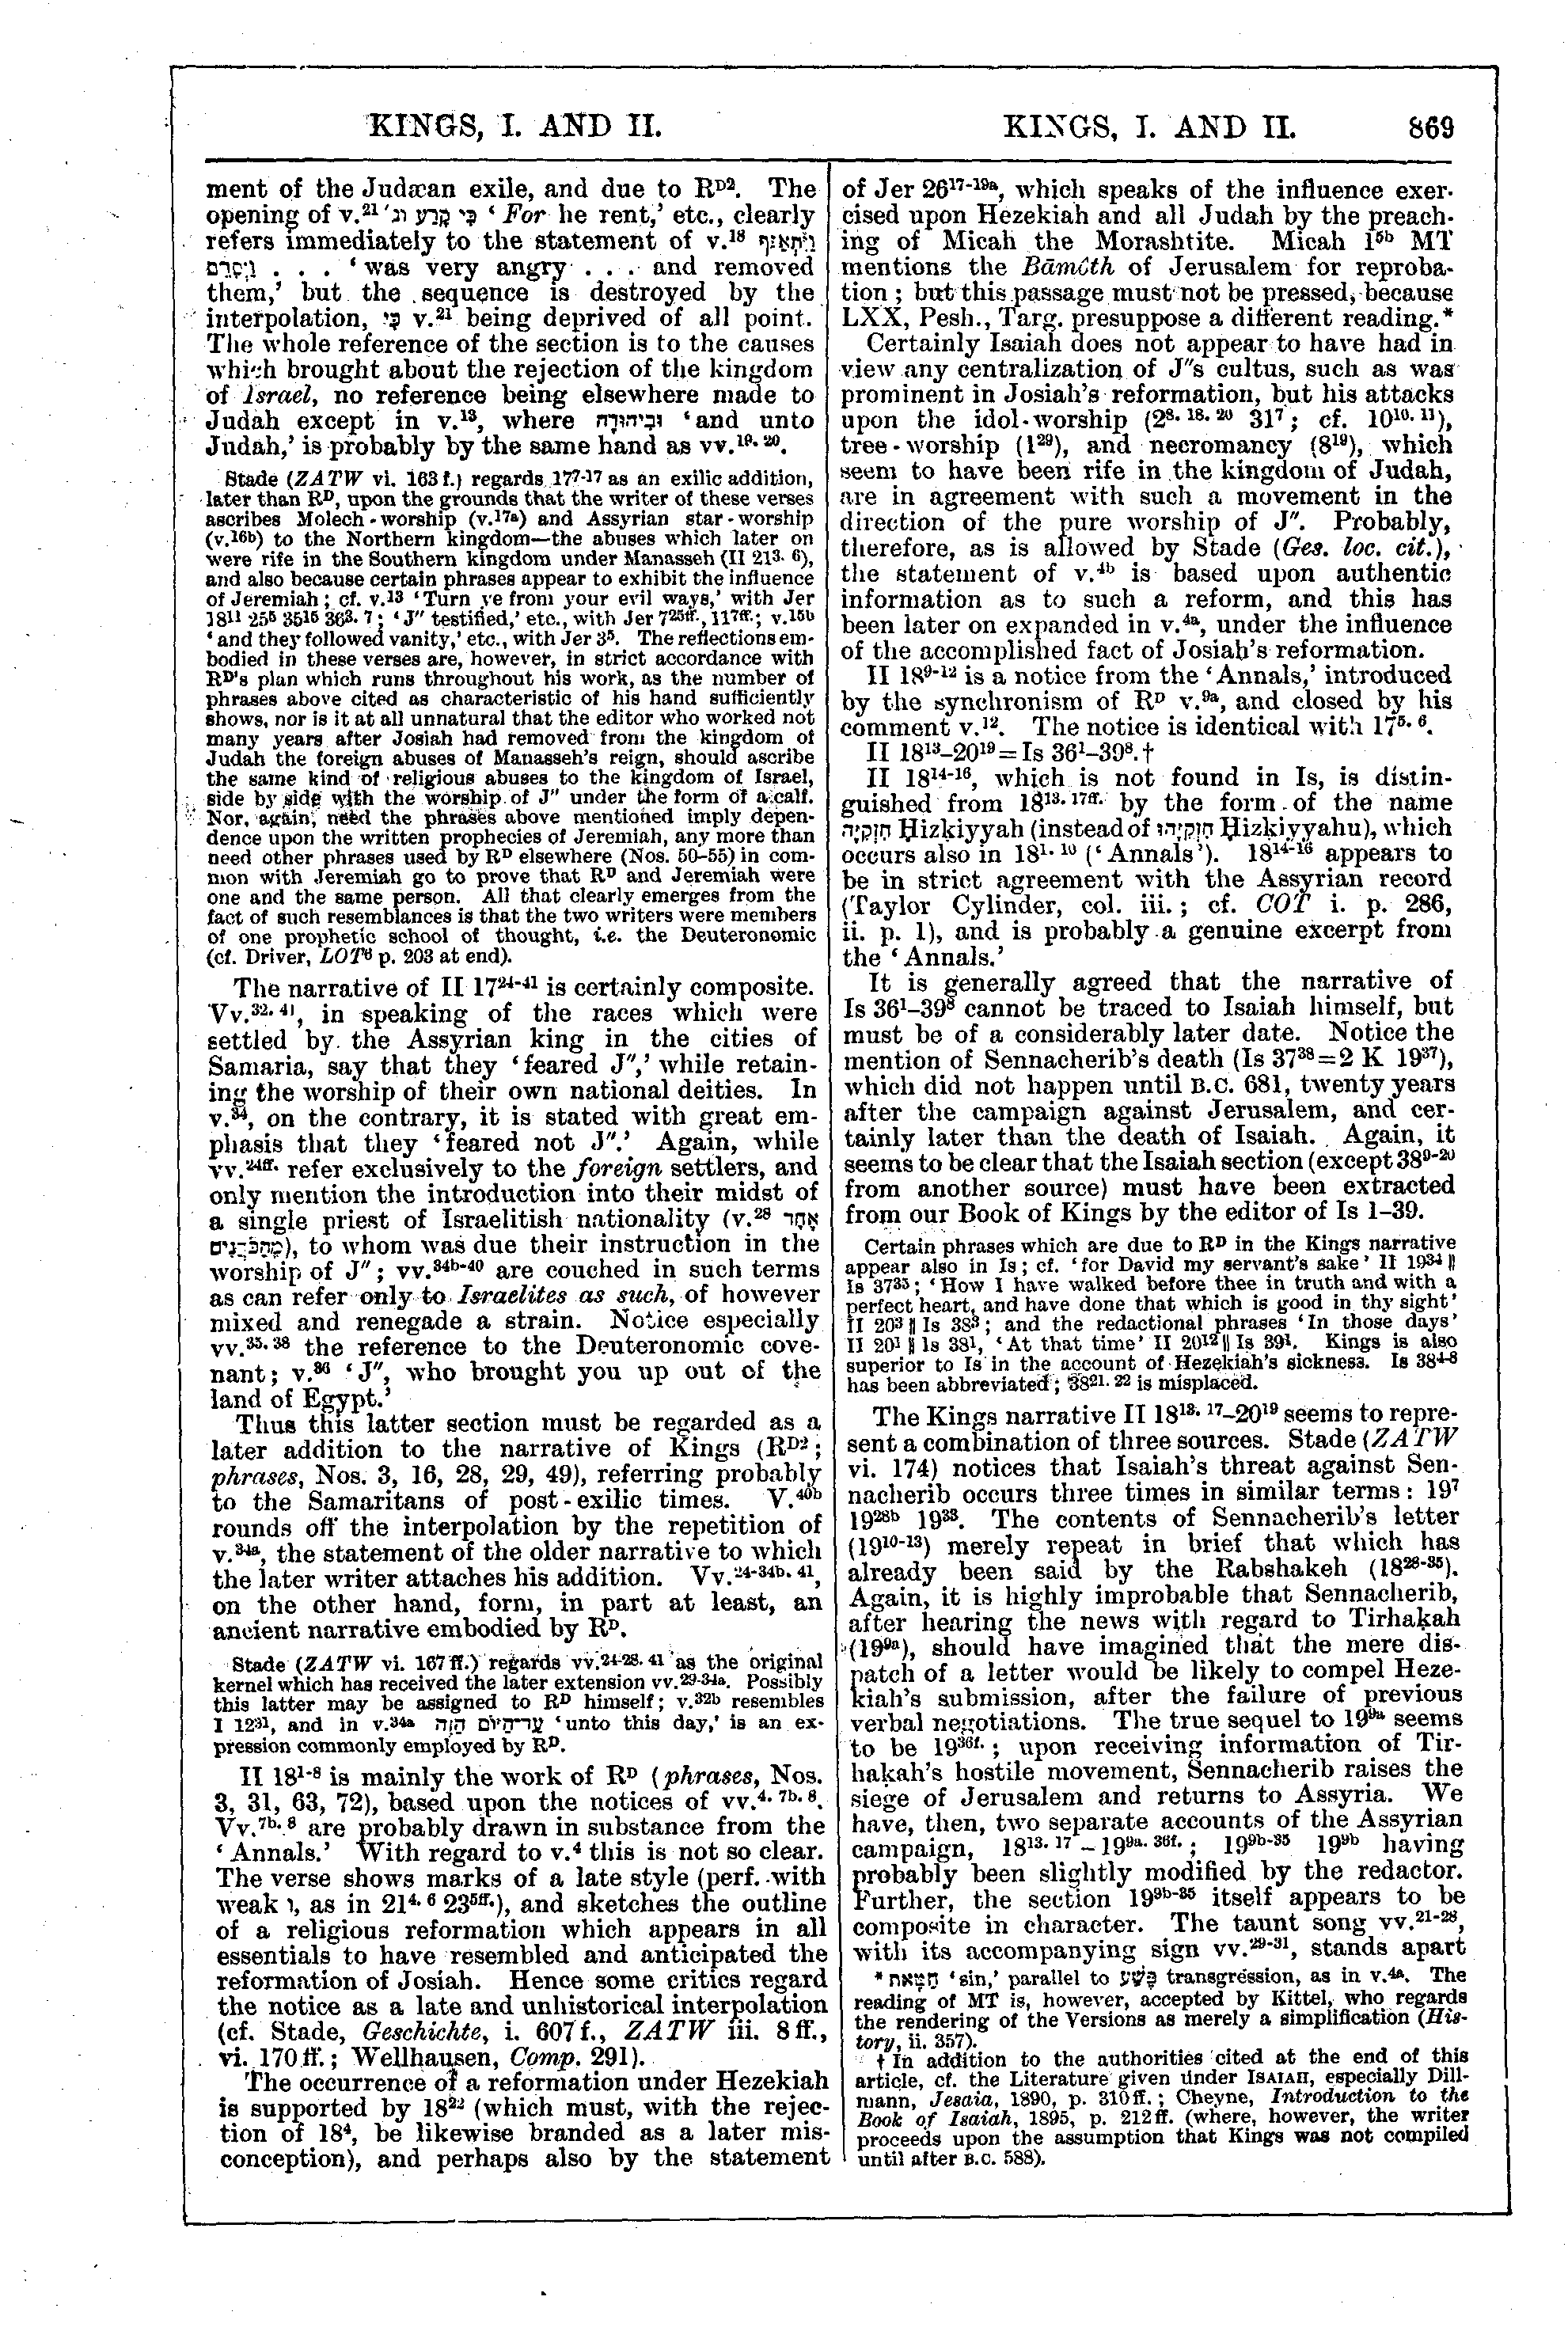 Image of page 869